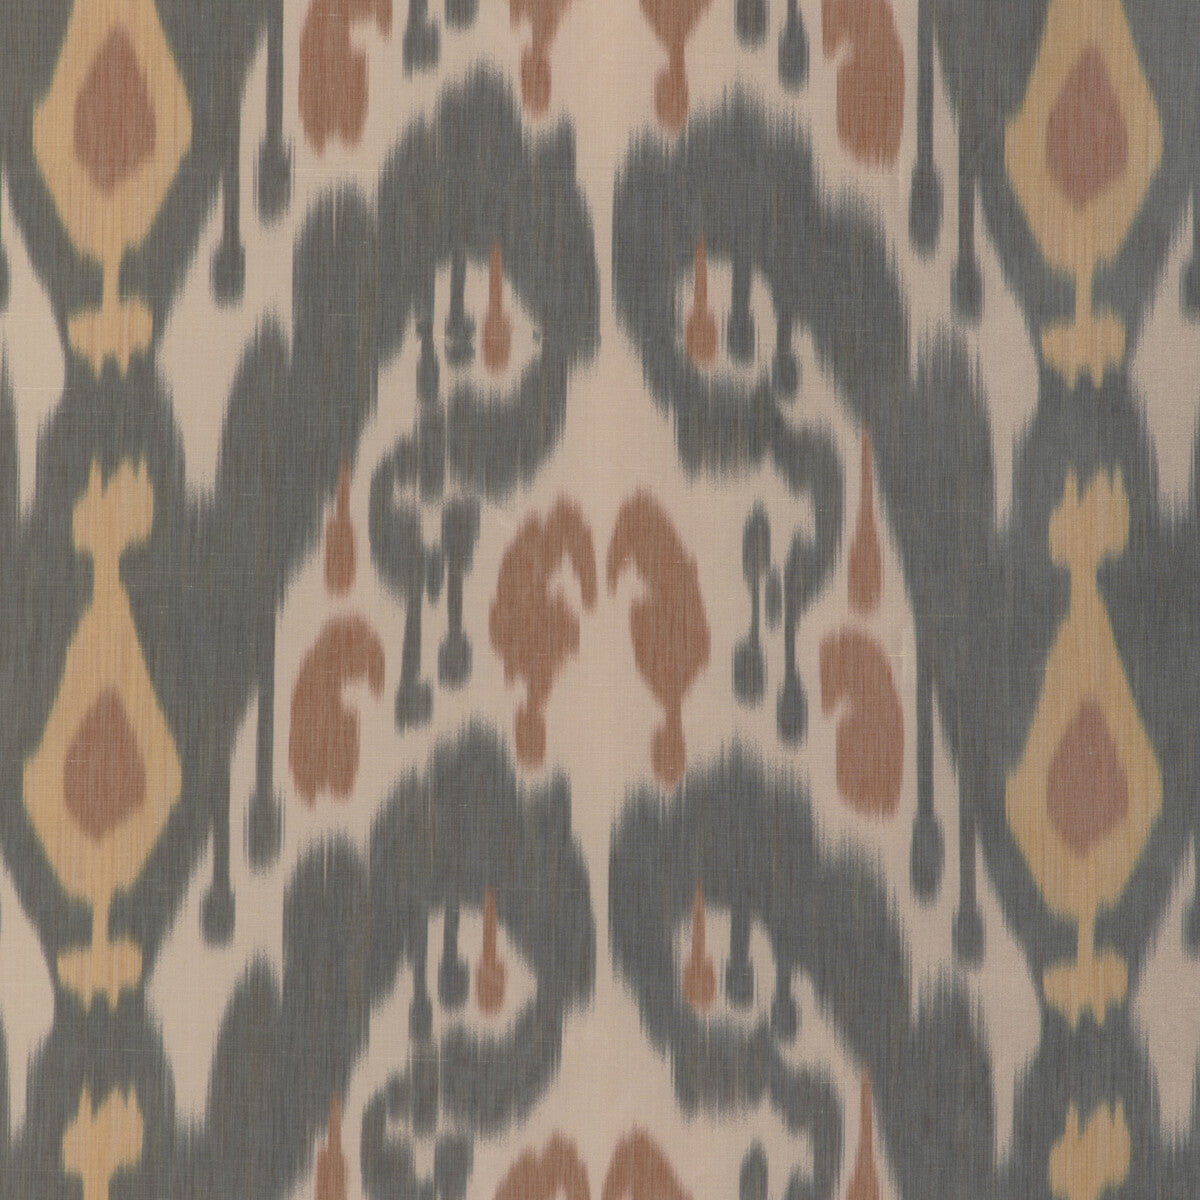 Bukara Warp Print fabric in ebony color - pattern 8023146.84.0 - by Brunschwig &amp; Fils in the Vienne Silks collection